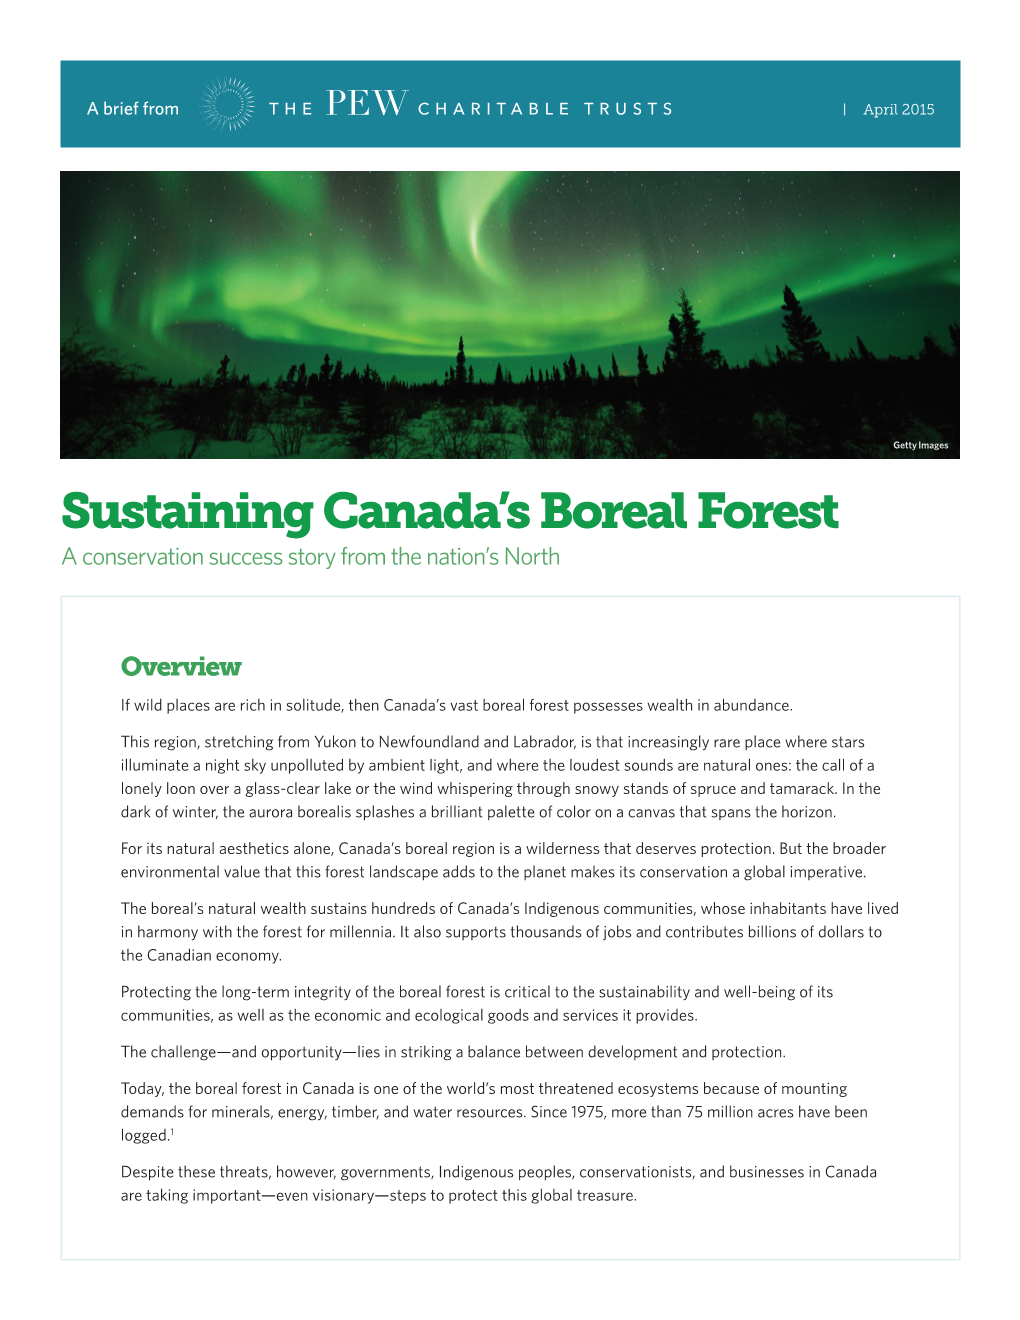 Sustaining Canada's Boreal Forest